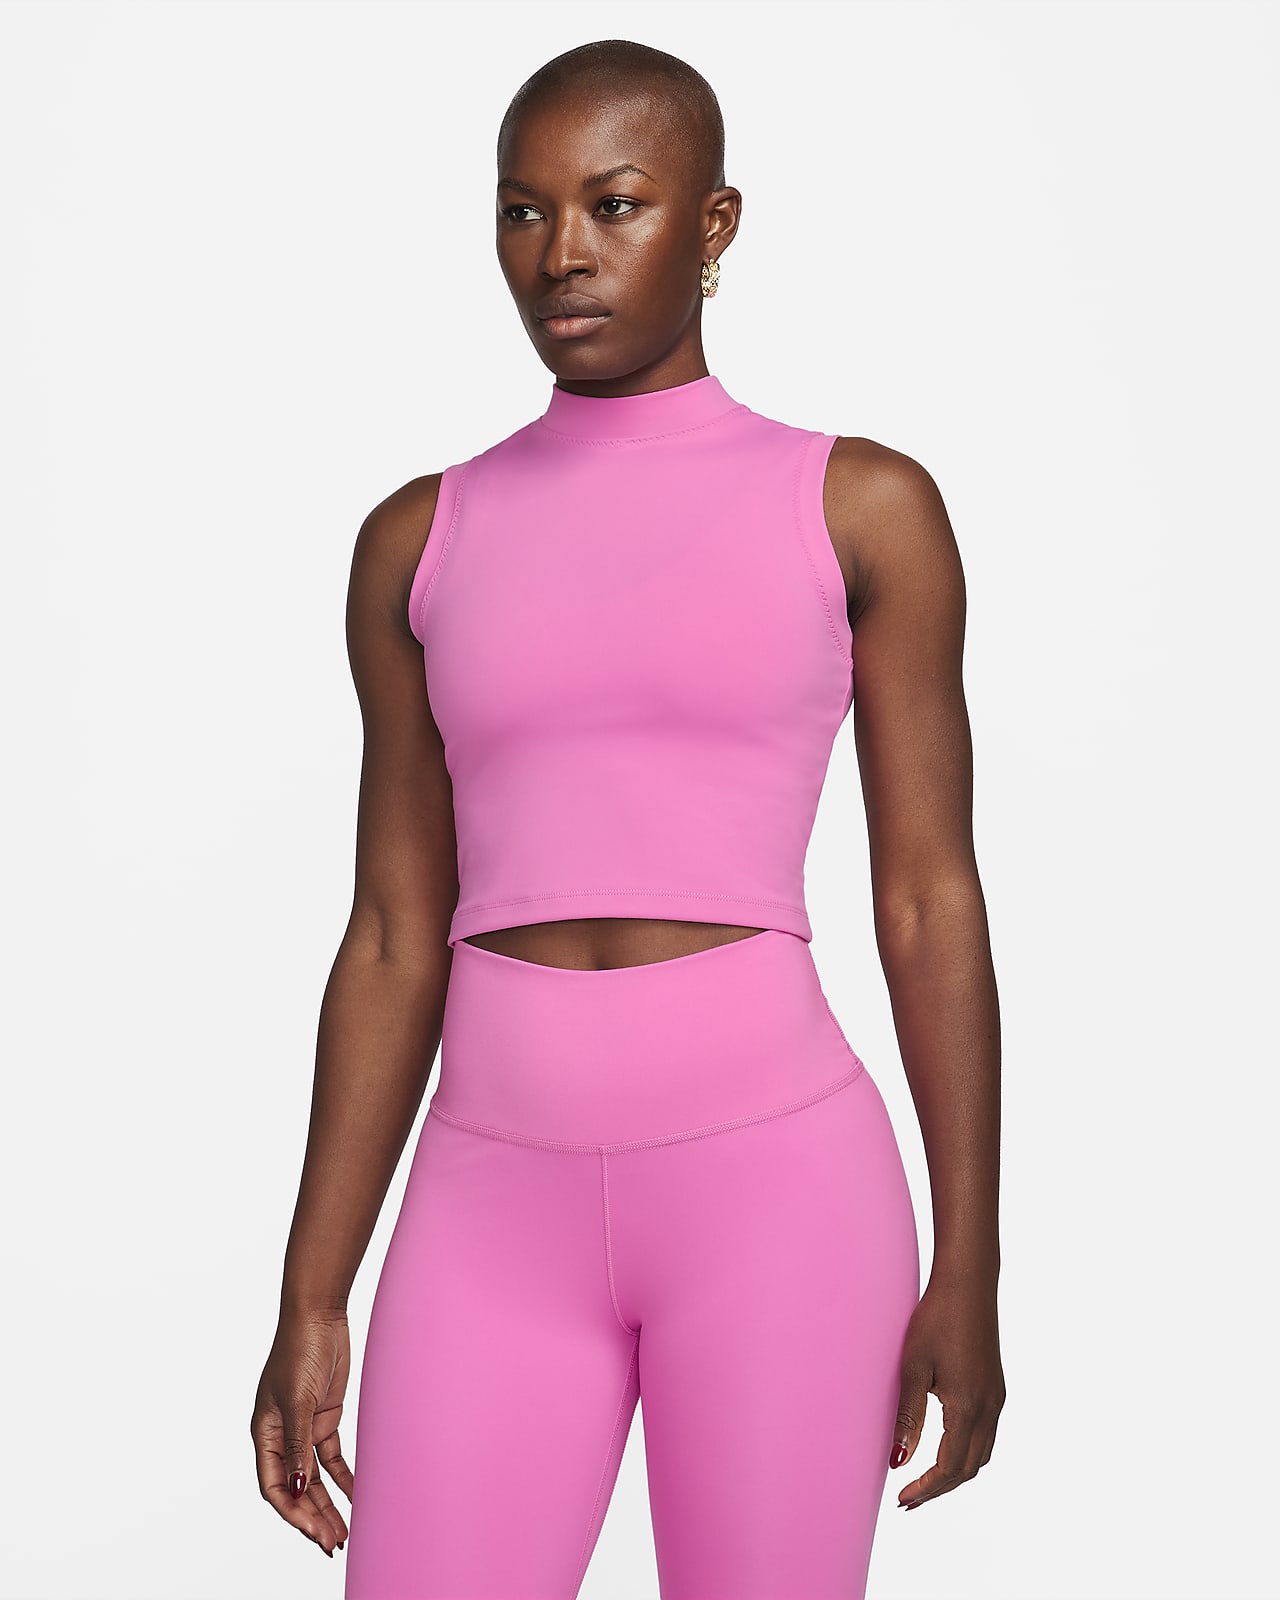 Women's Leggings - Fitted Fit